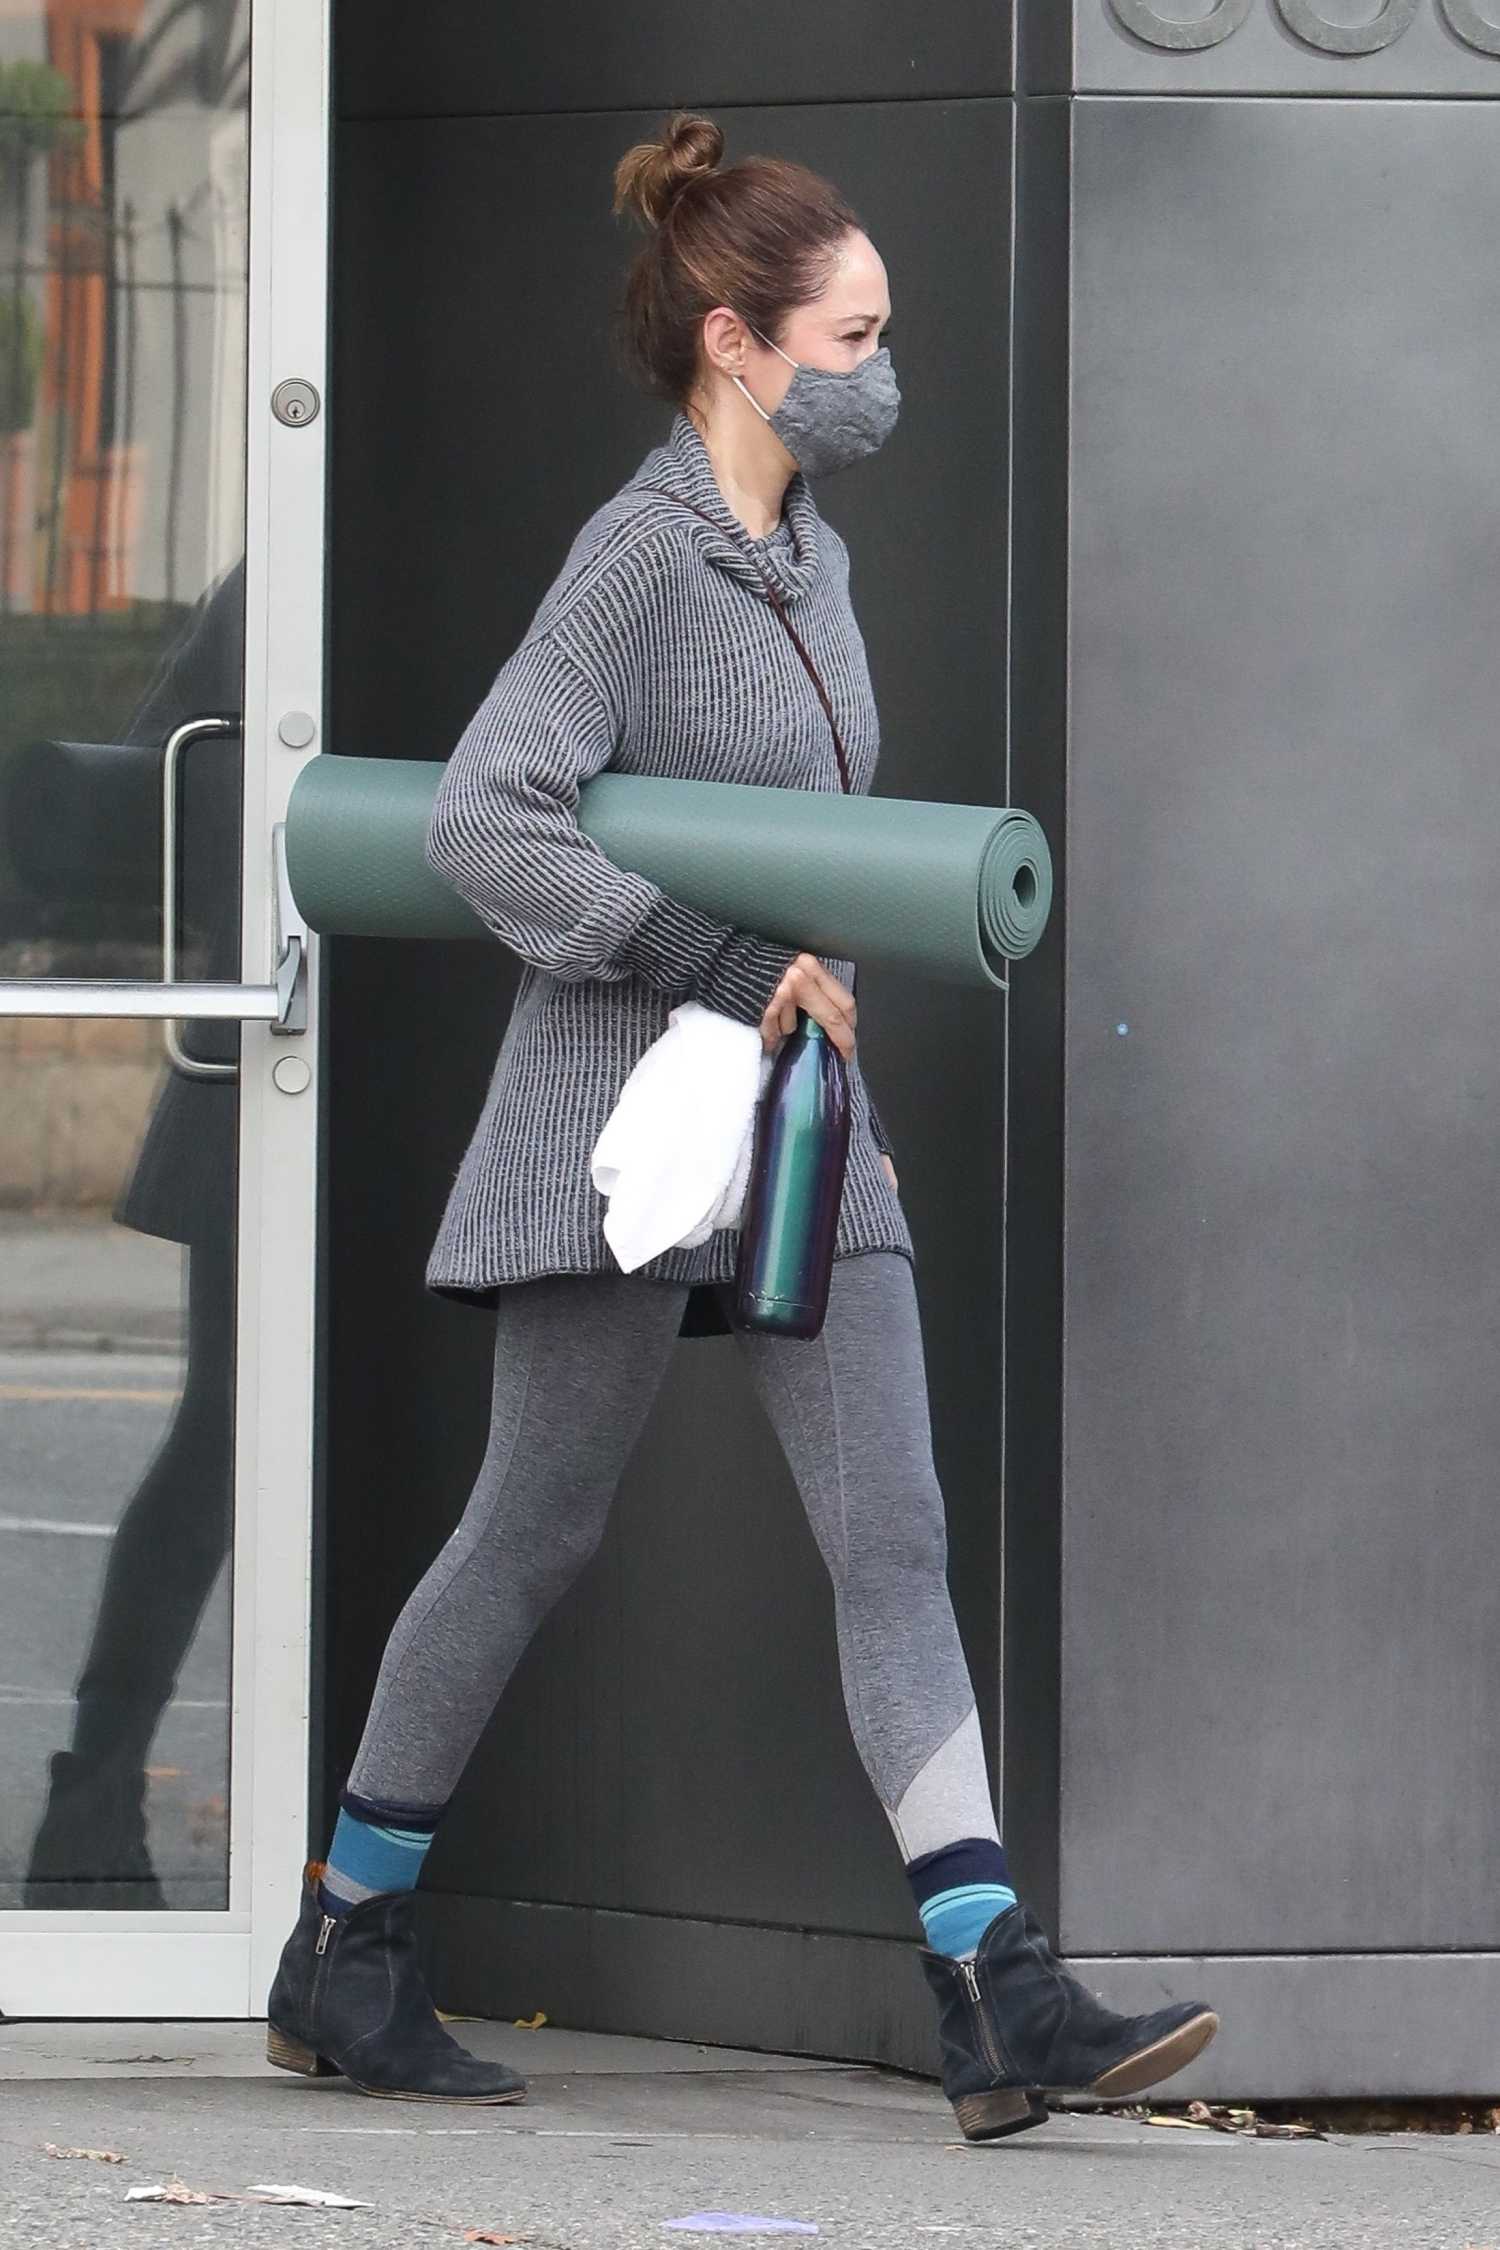 Autumn Reeser in a Grey Leggings Leaves a Yoga Class in Vancouver